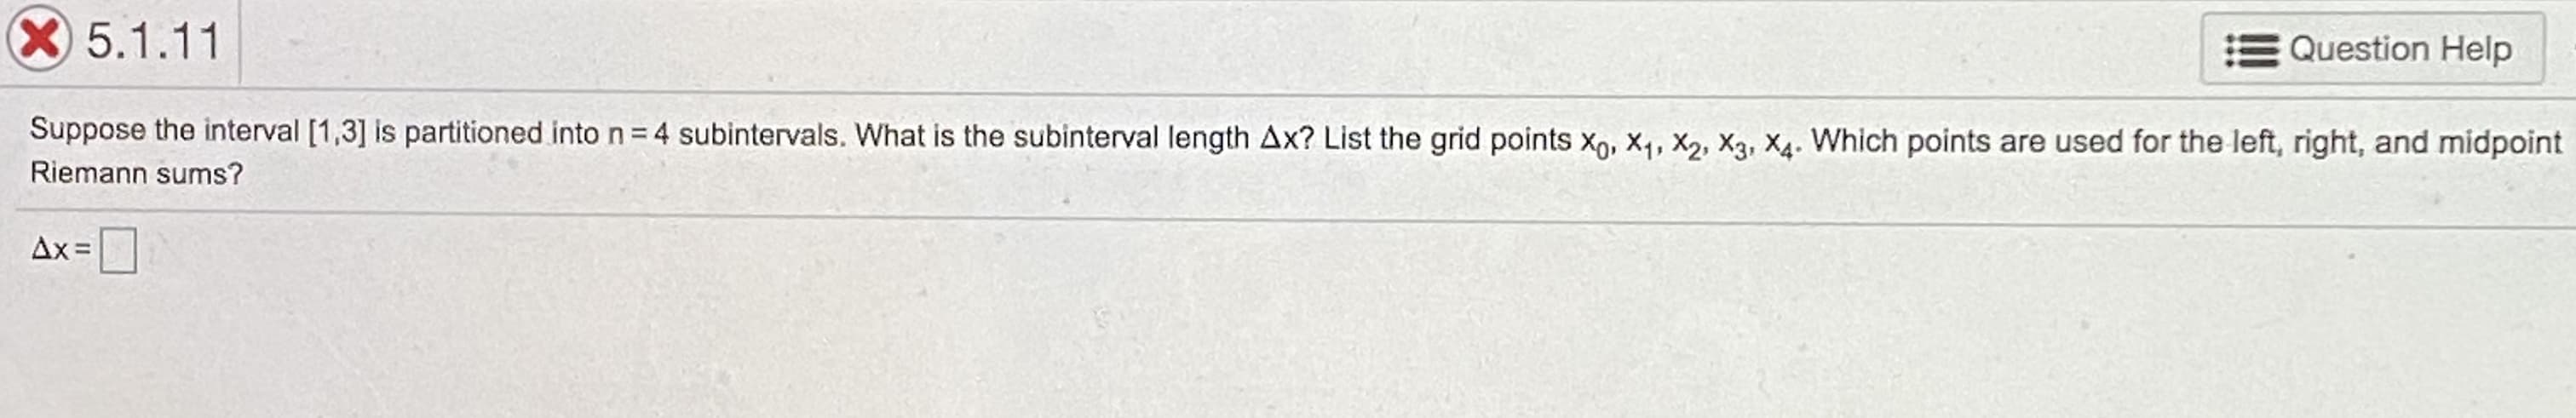 X5.1.11
Question Help
Suppose the interval [1,3] is partitioned into n=4 subintervals. What is the subinterval length Ax? List the grid points X, X4, X2, X3, X4. Which points are used for the left, right, and midpoint
Riemann sums?
Ax =
